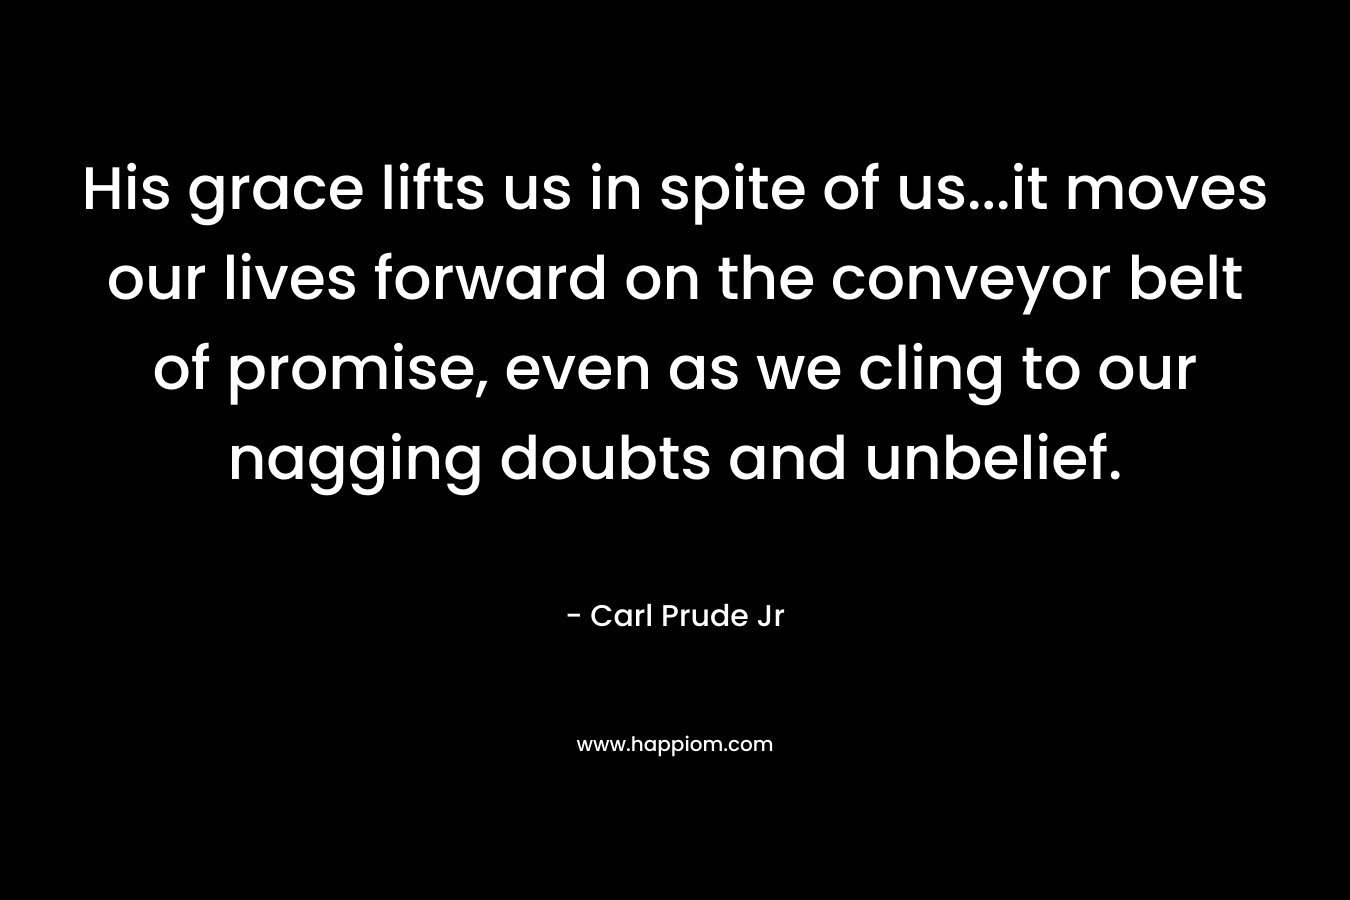 His grace lifts us in spite of us...it moves our lives forward on the conveyor belt of promise, even as we cling to our nagging doubts and unbelief.